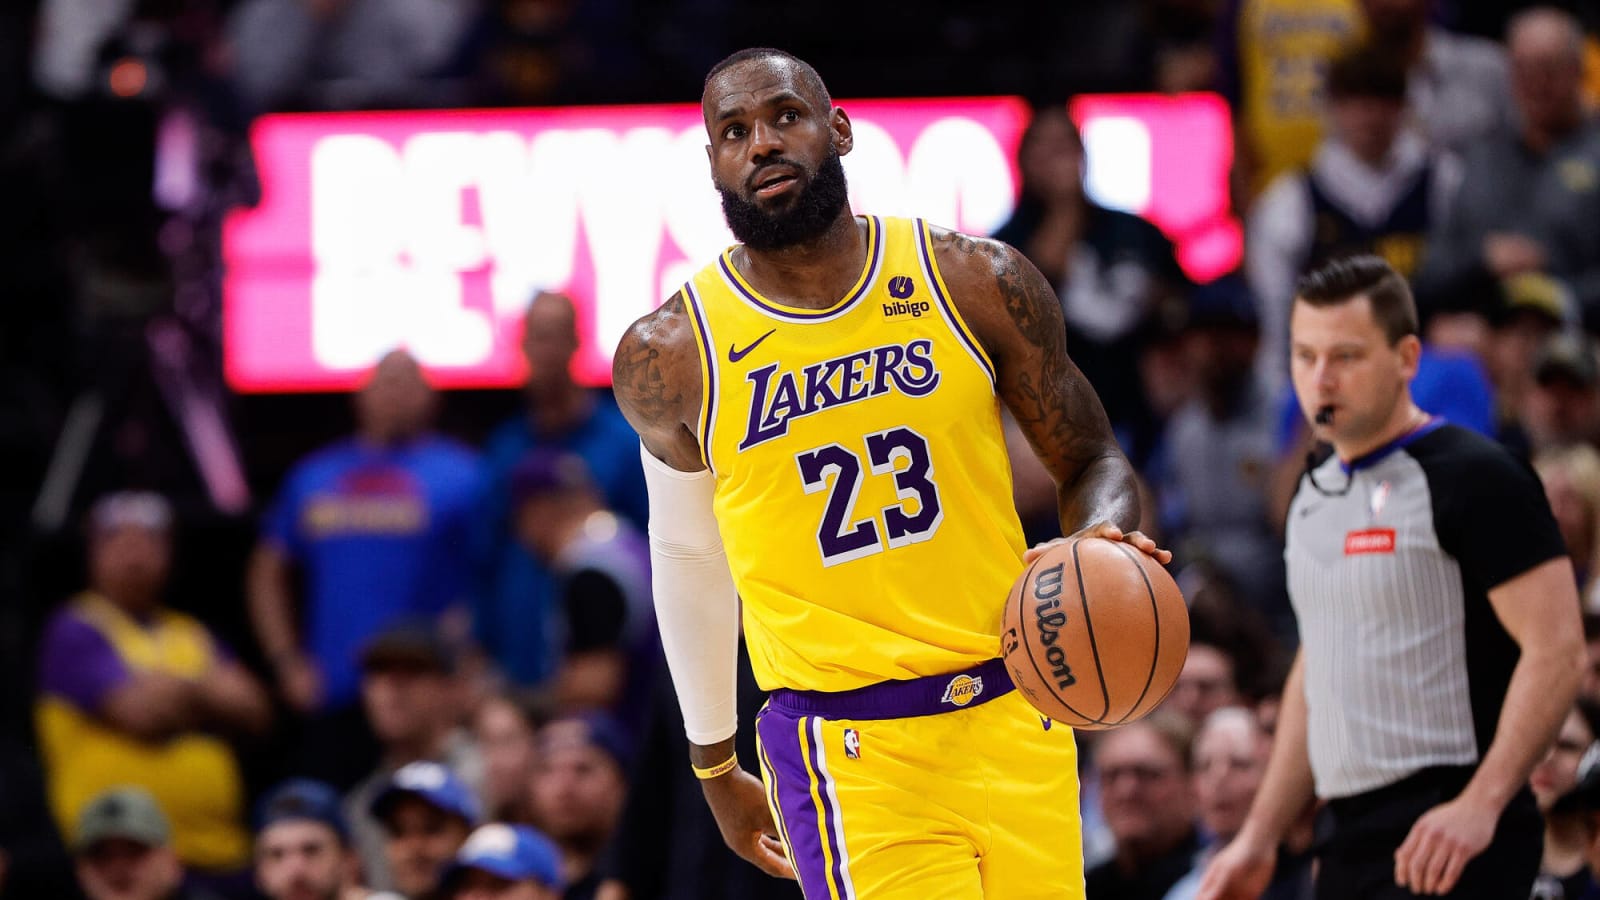 LeBron James ‘GOAT’ status takes hit after Darvin Ham firing, claims Stephen A. Smith